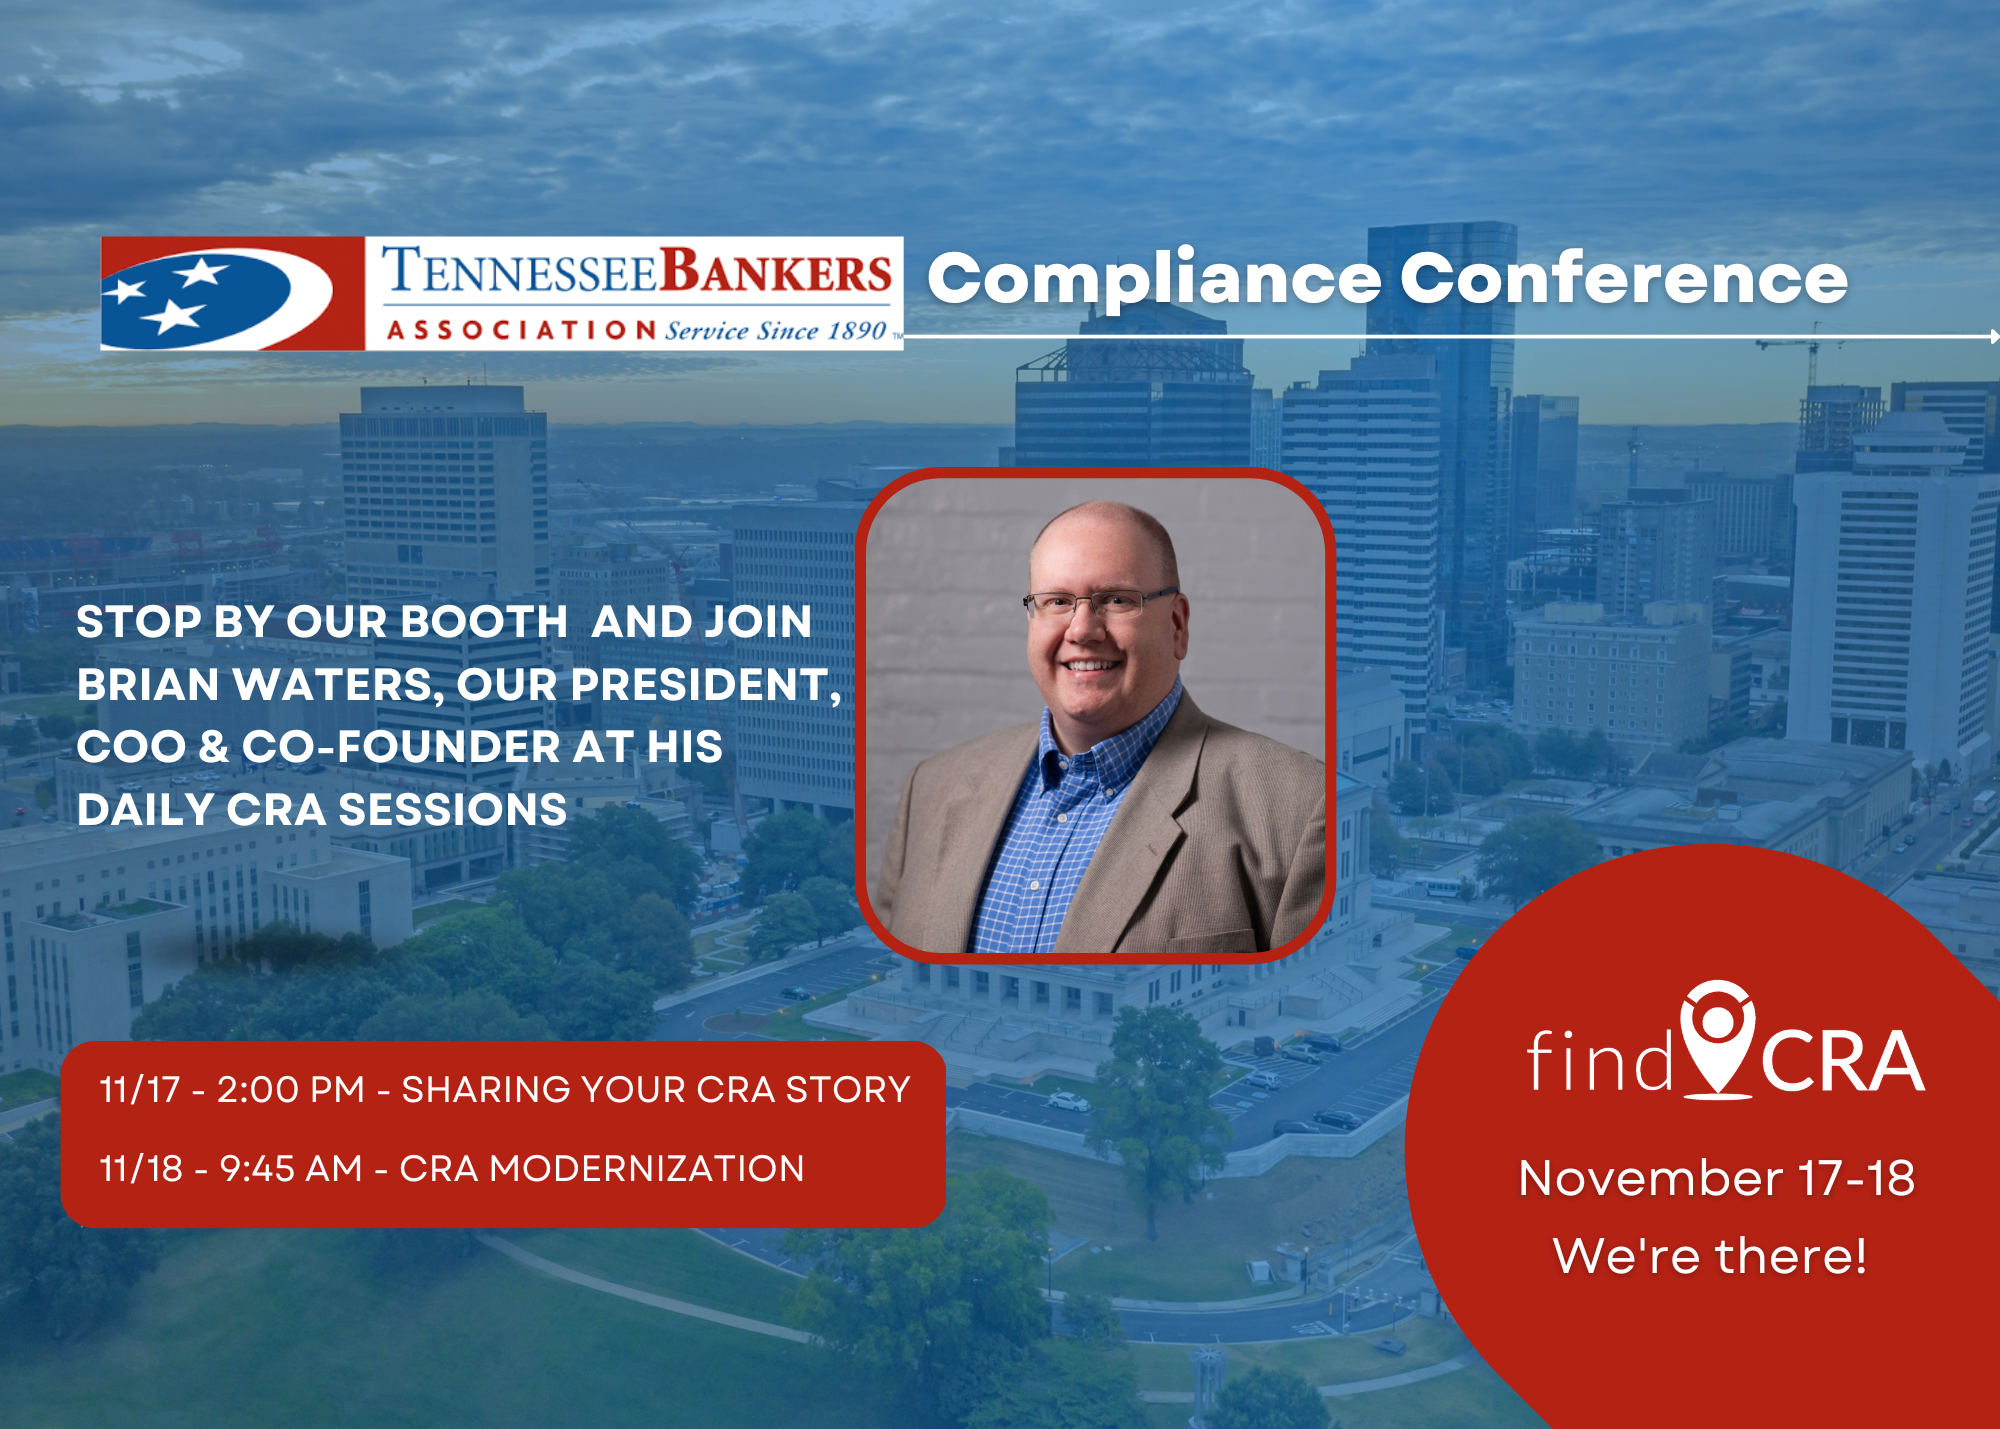 findCRA to Lead CRA Sessions and Exhibit at the 2022 Tennessee Bankers Association’s Compliance Conference